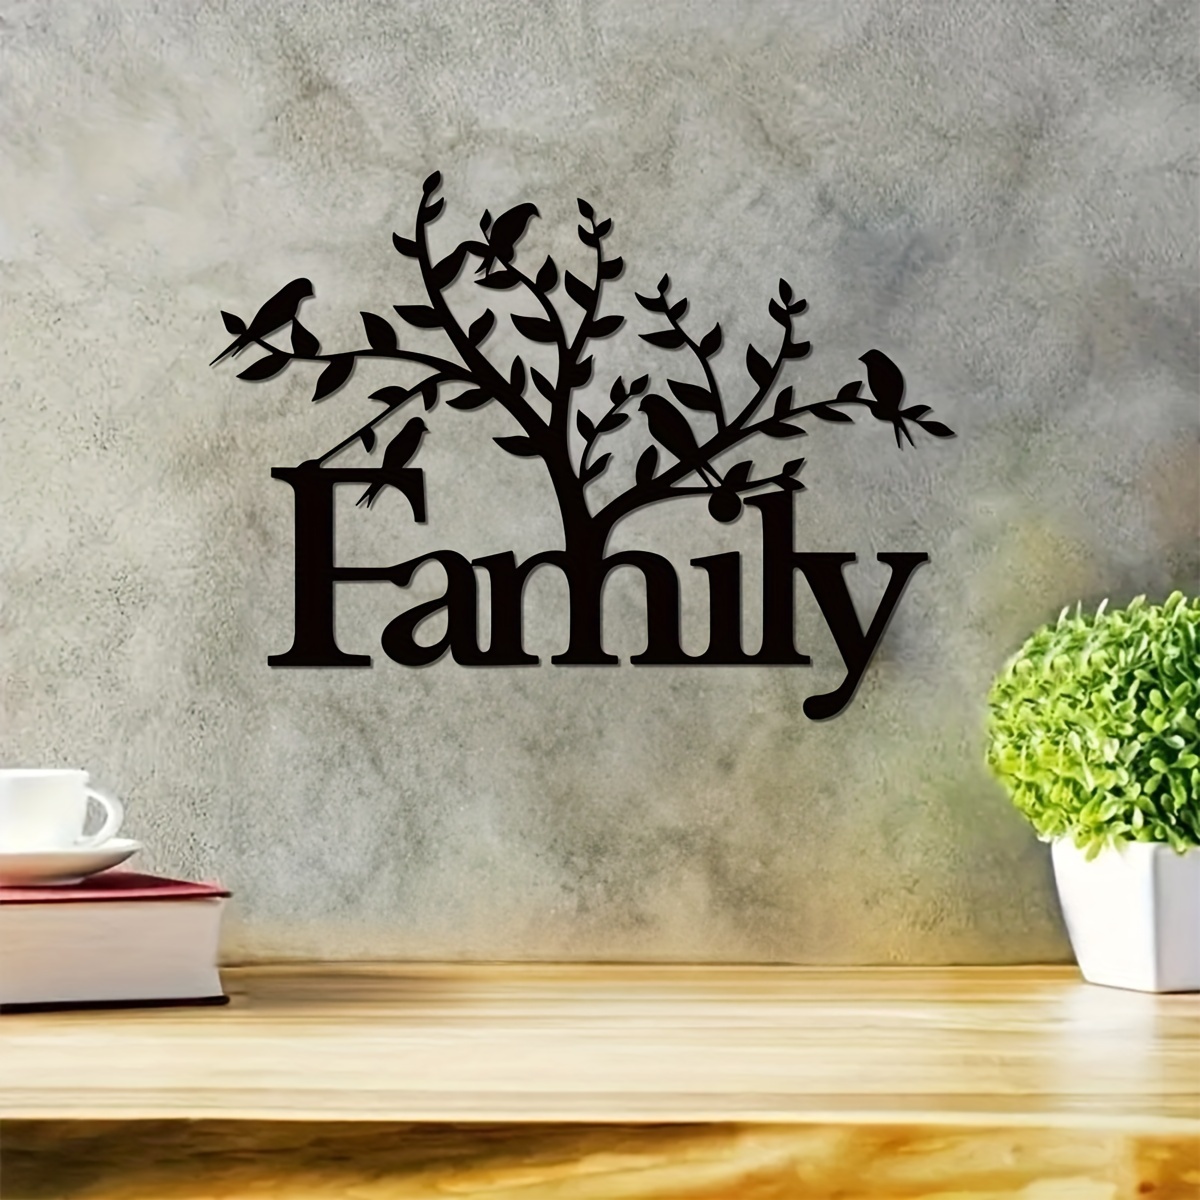 Family Tree Notebook-handwritten ancestors' memories to write into personal  family history and genealogy